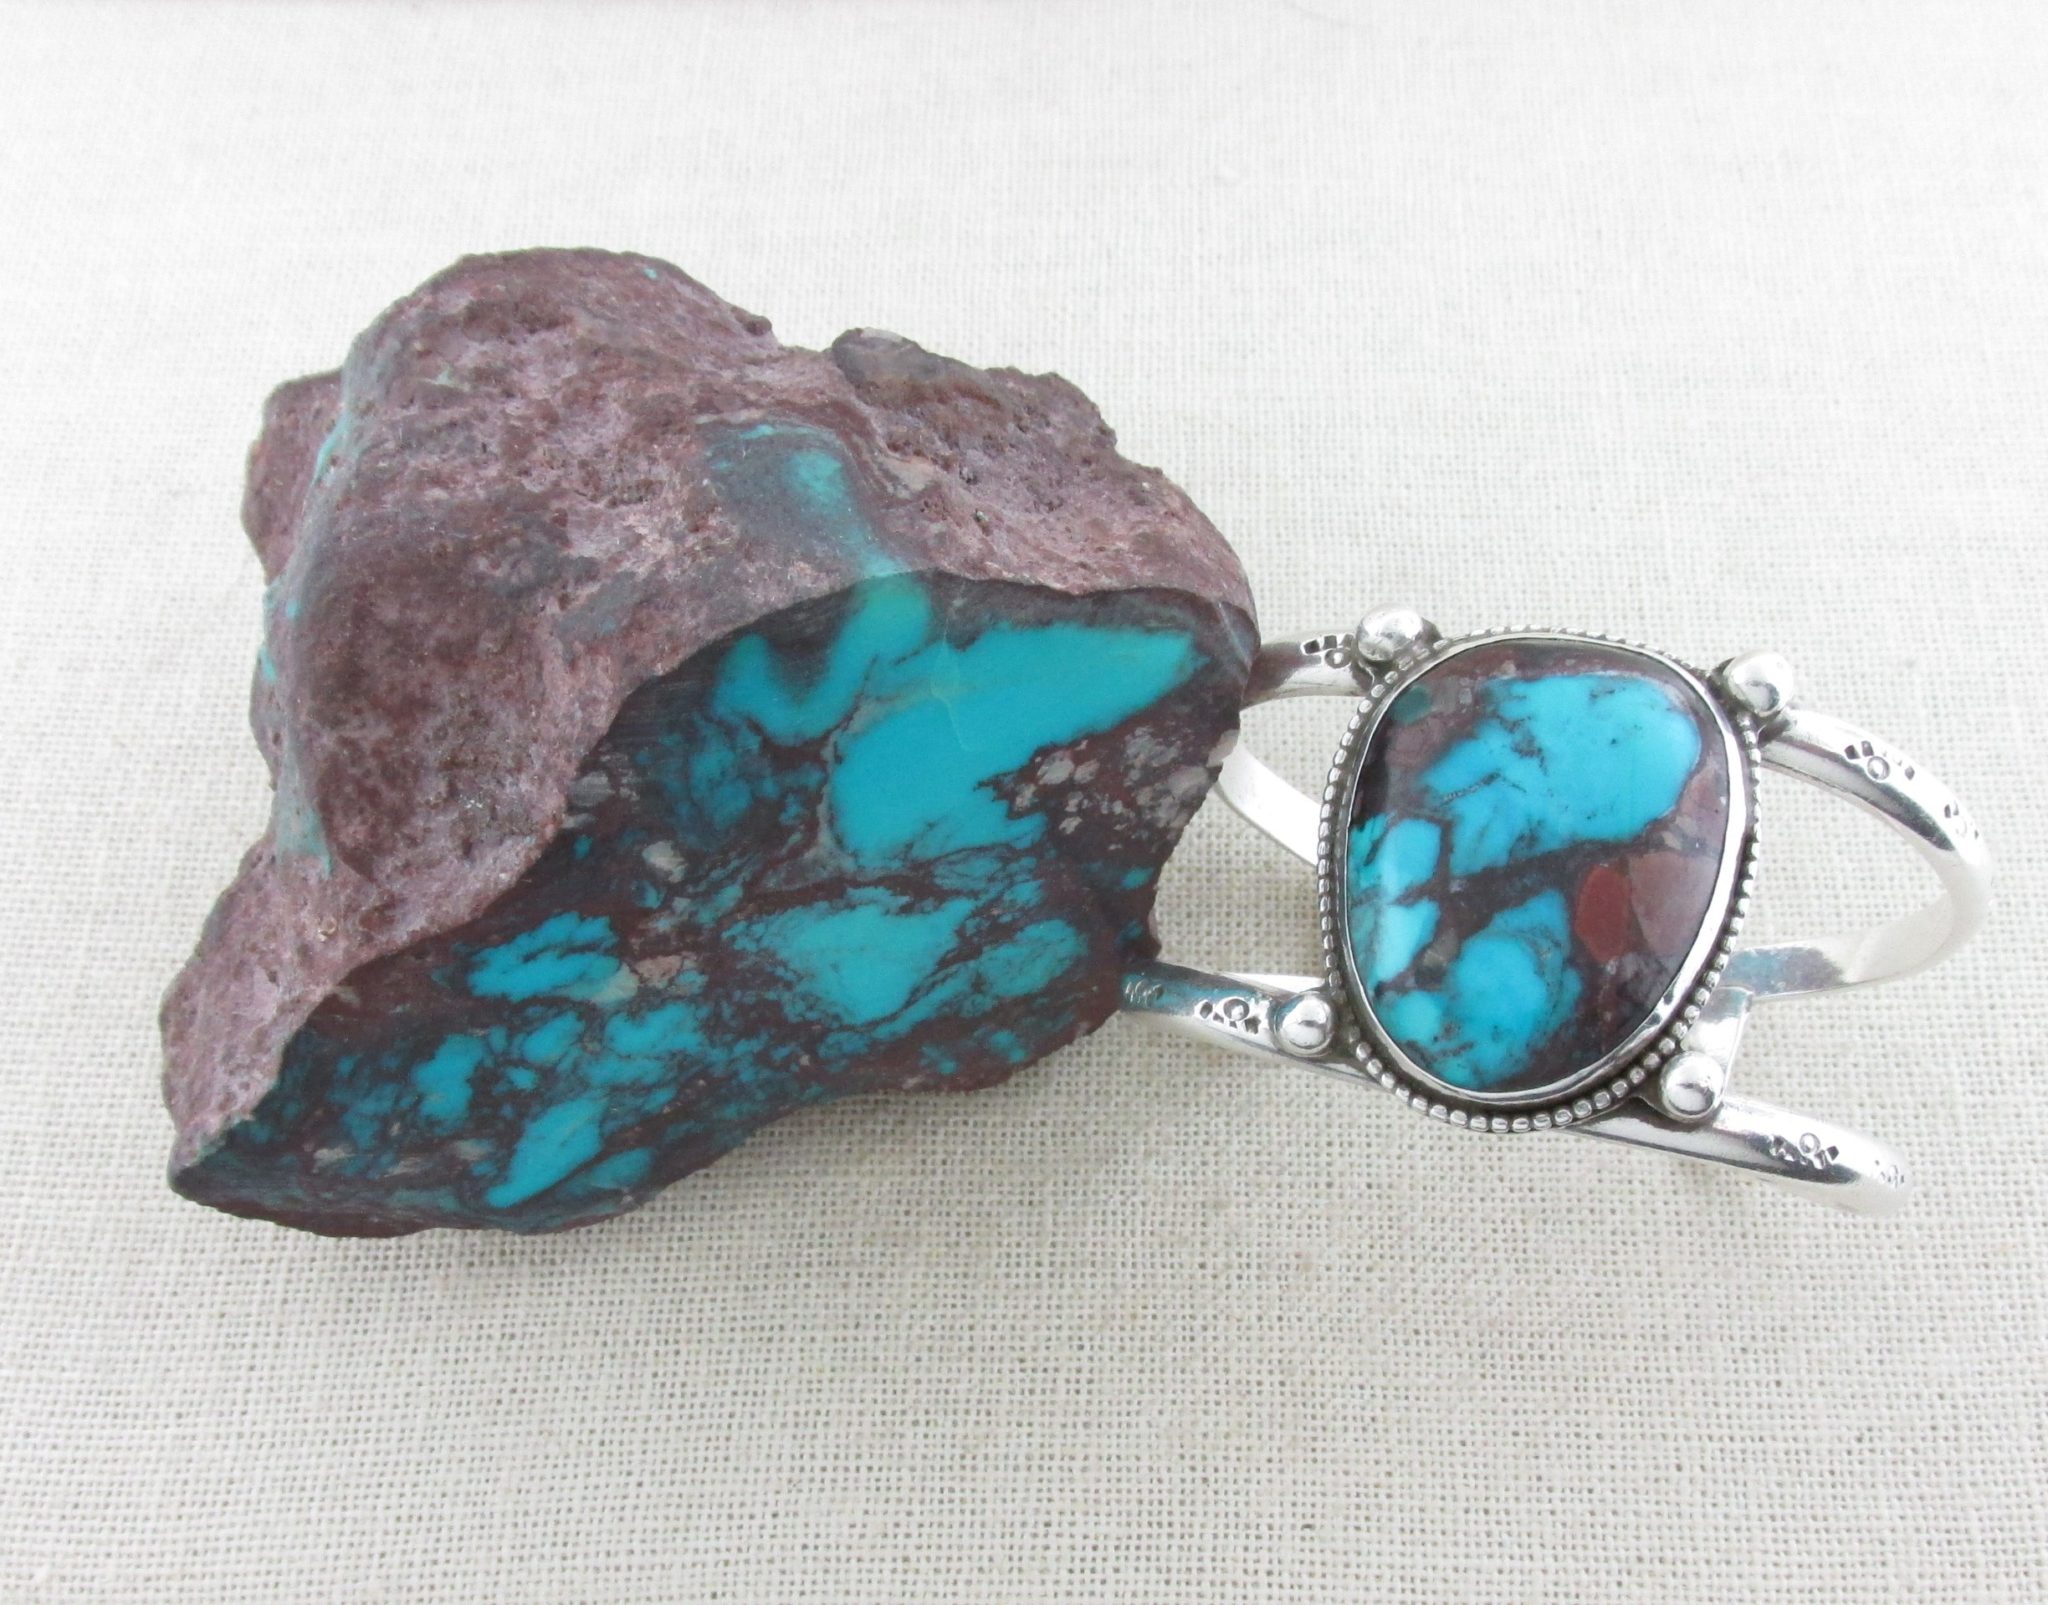 Bisbee Turquoise with Bisbee Matching Ring